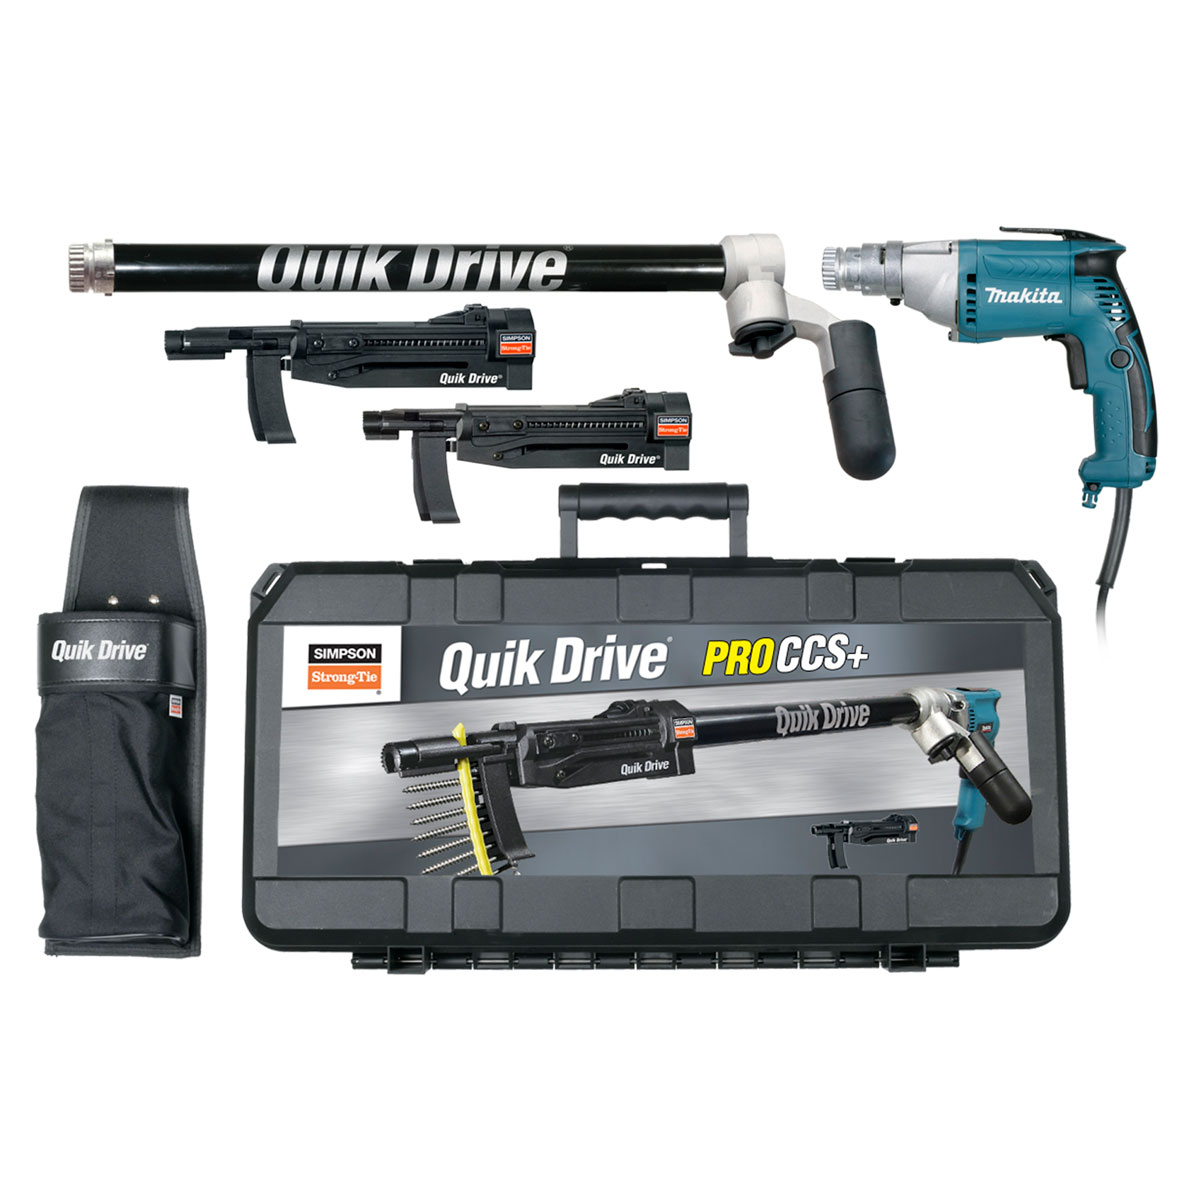 Quik Drive Auto-Feed System with Makita Drill